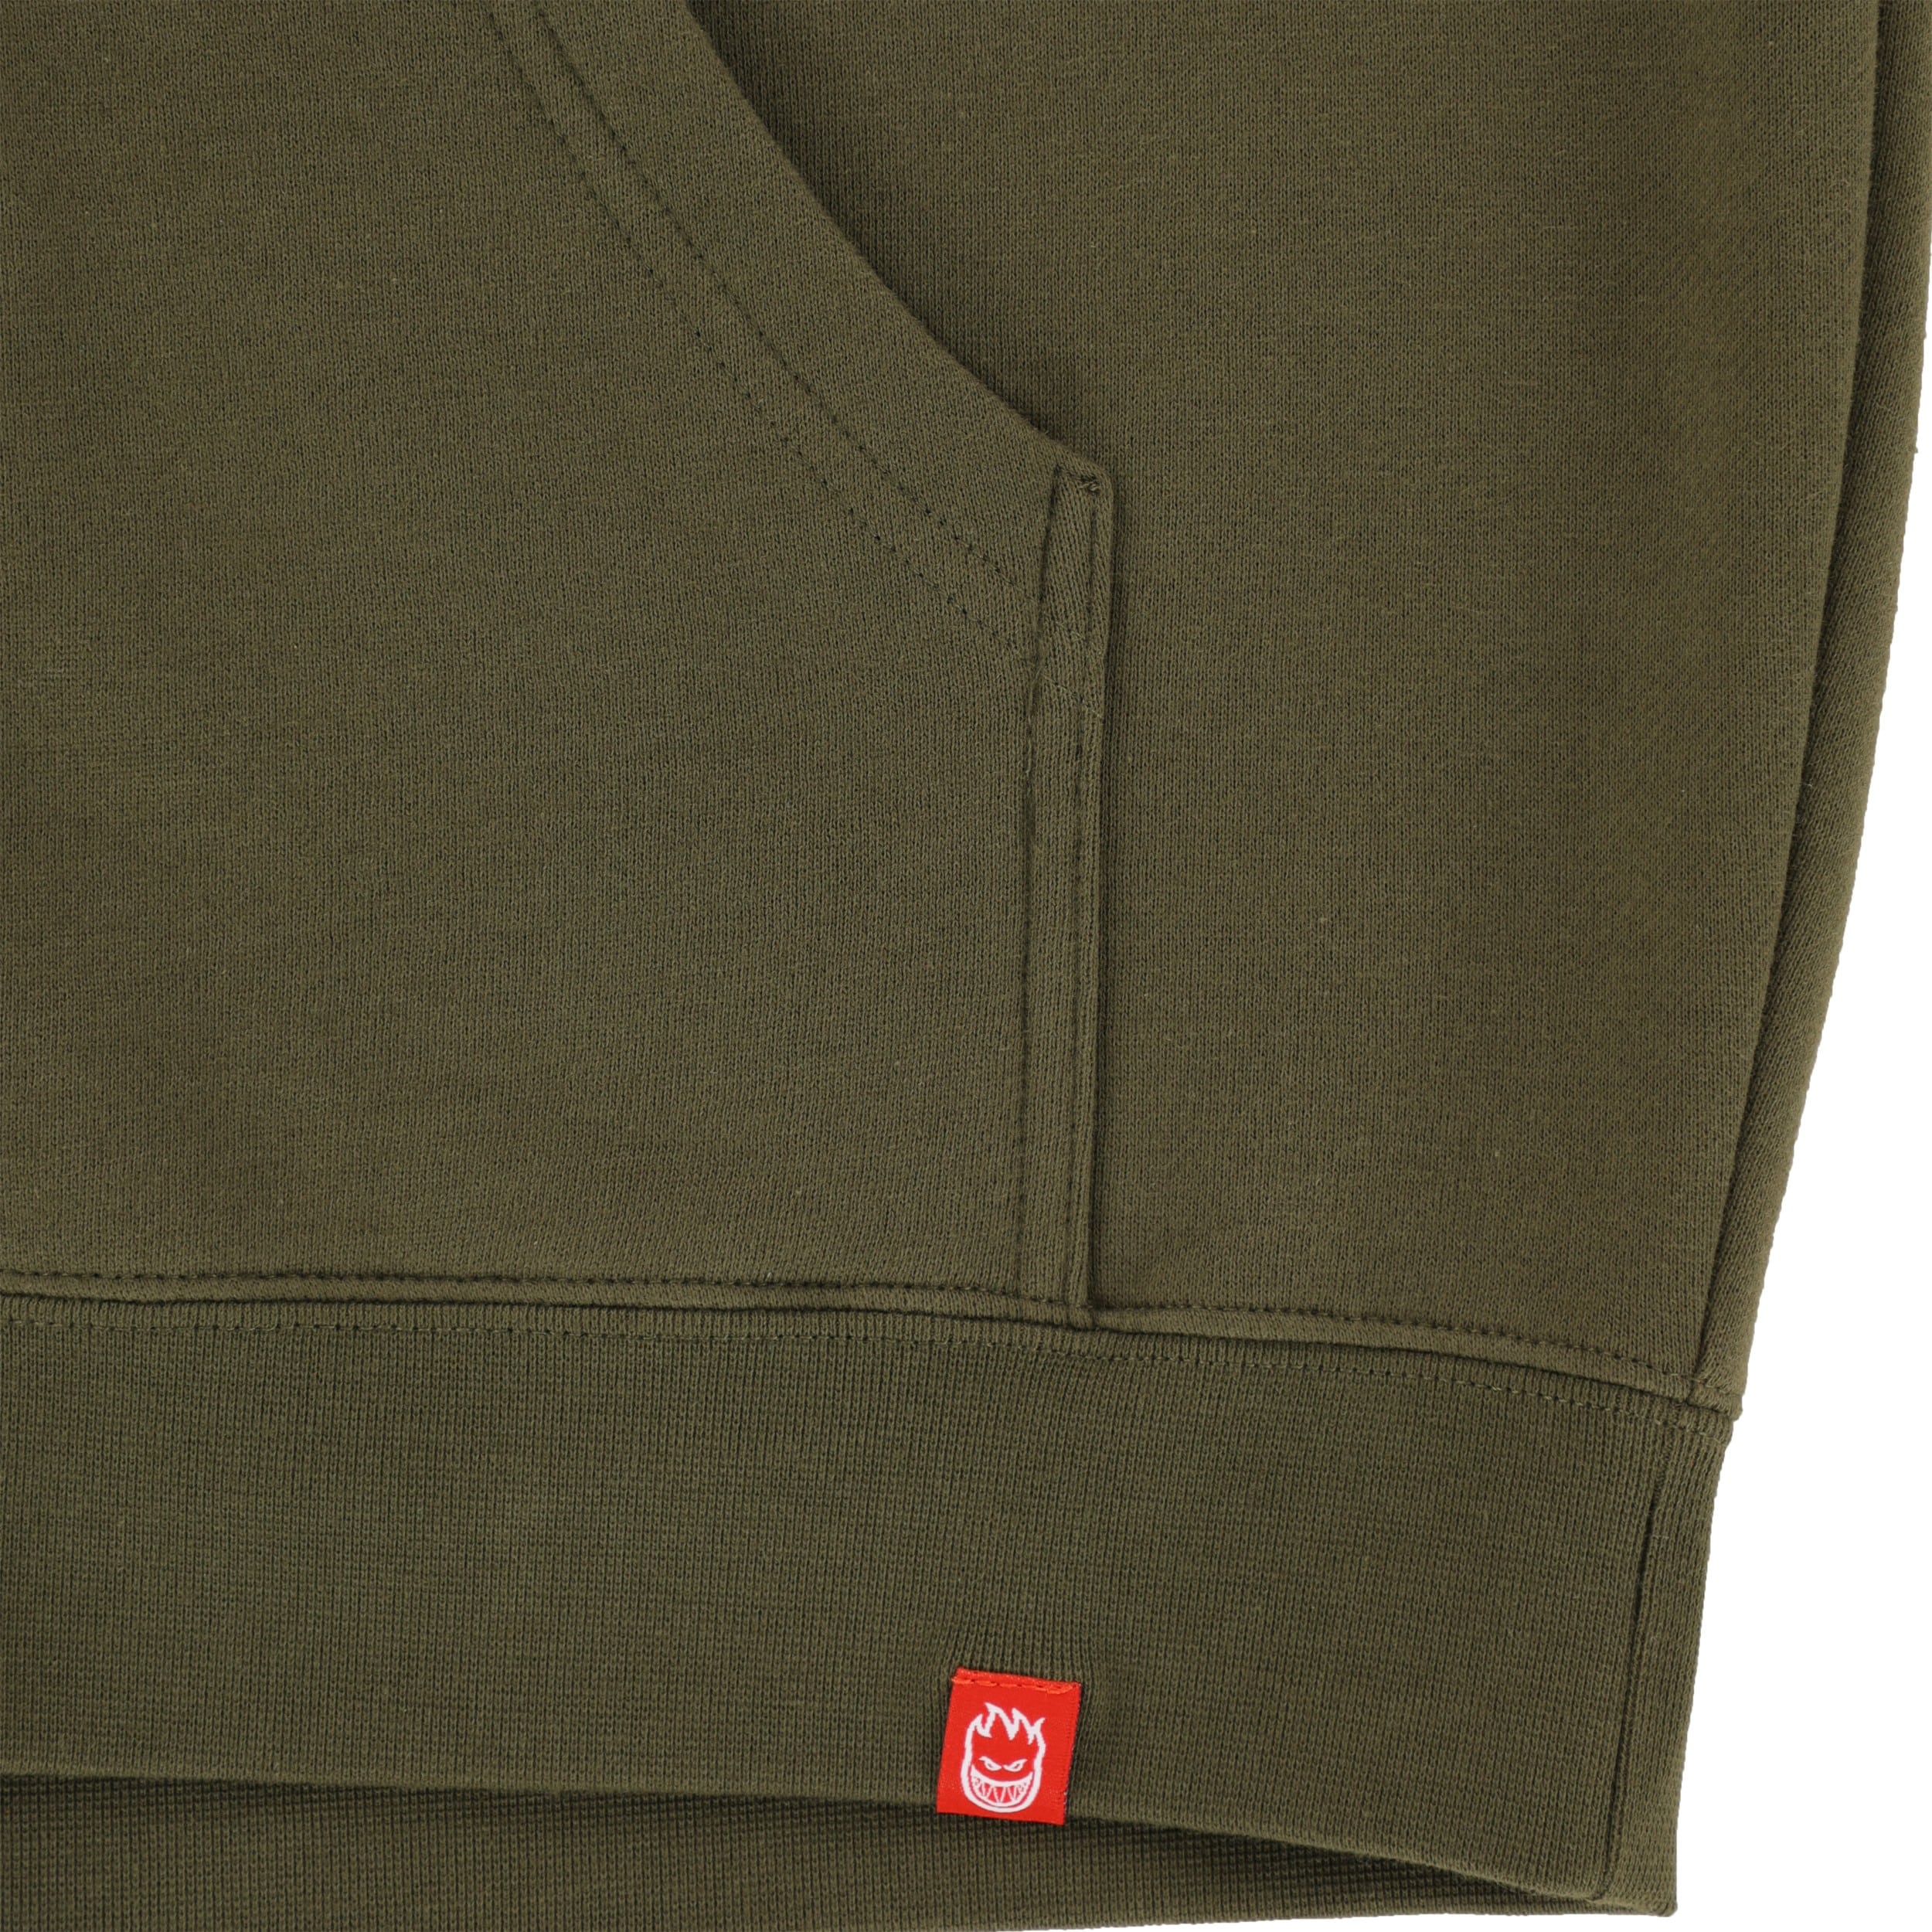 Spitfire Swirled Classic Zip Hoodie - army/red | Tactics